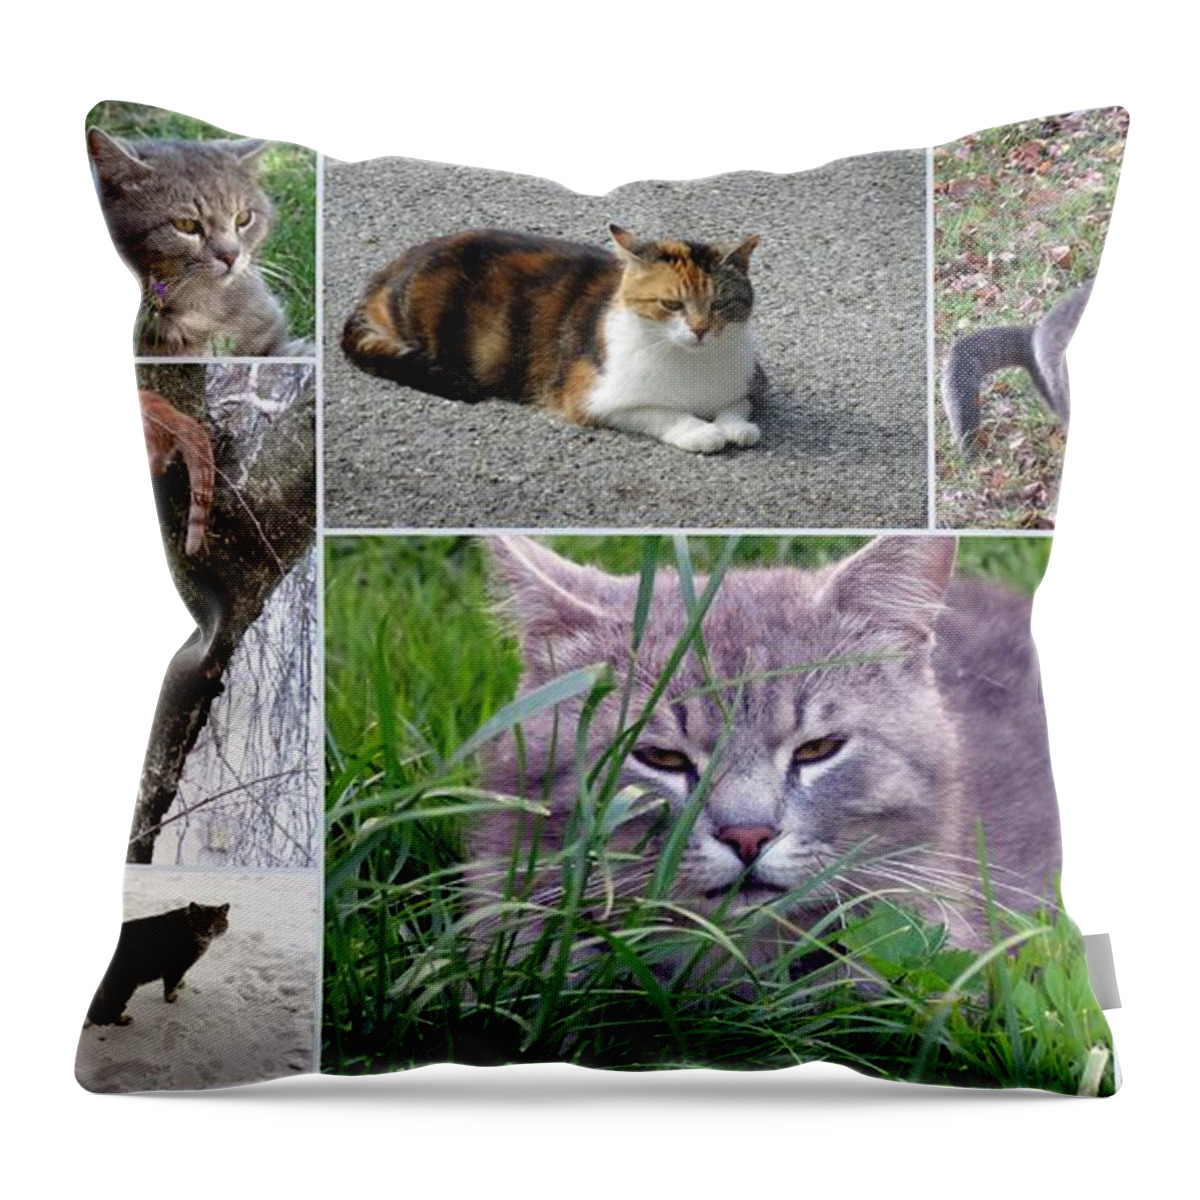 Cats Throw Pillow featuring the photograph Collage Of Photos Cats by Vesna Martinjak